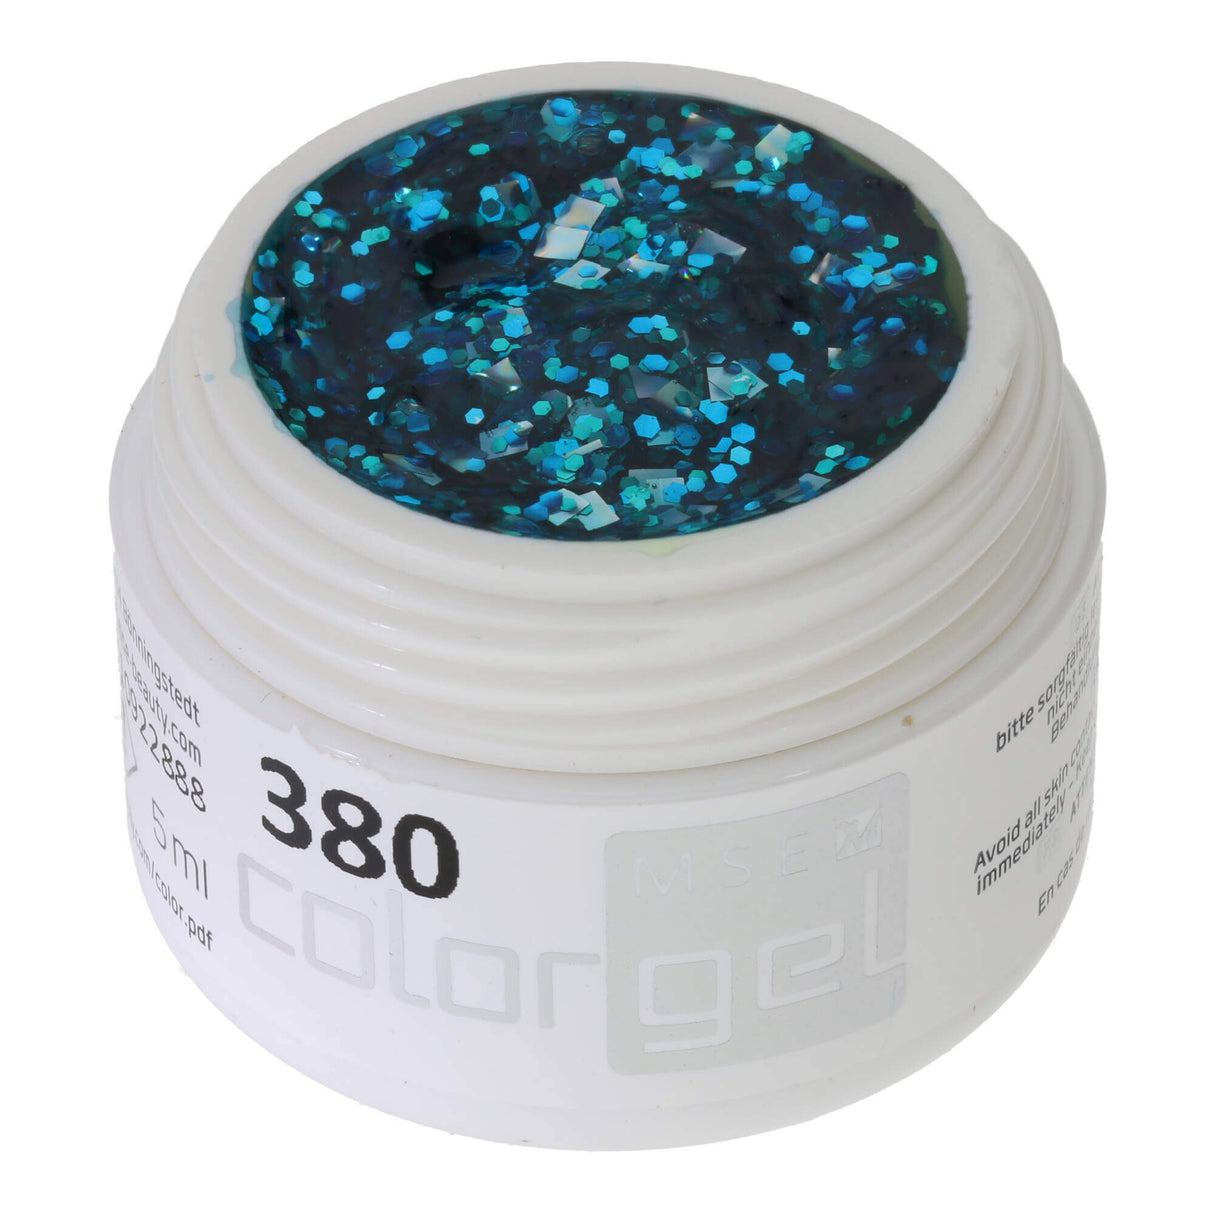 # 380 Premium-GLITTER Color Gel 5ml Silver glitter gel with turquoise accents